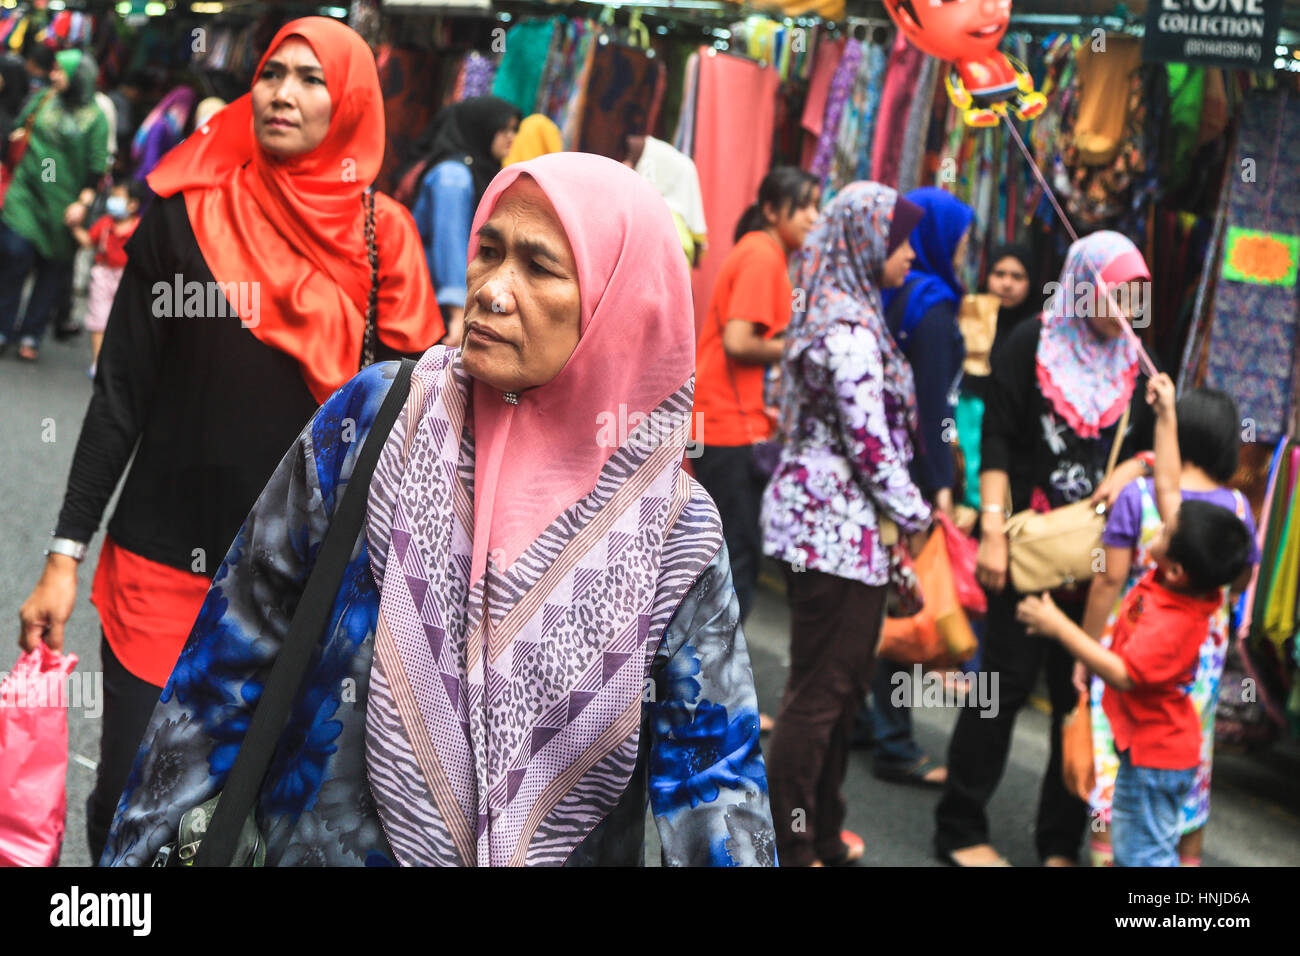 KUALA LUMPUR, MALAYSIA - MARCH 8, 2014: A woman wearing the traditional islamic headscarf walks in a shopping street in Little India district of Malay Stock Photo